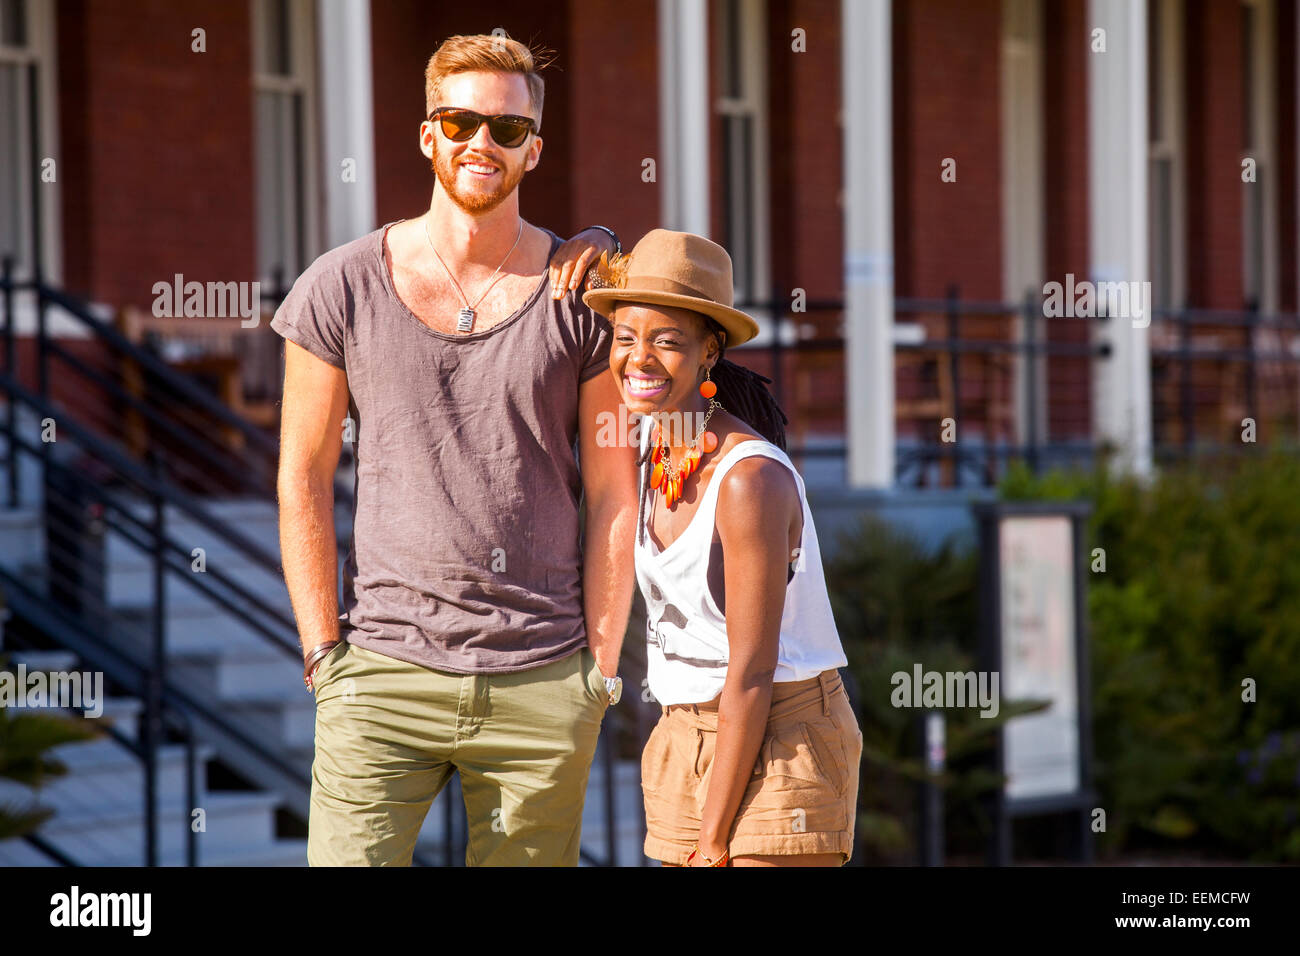 Laughing couple walking outdoors Banque D'Images